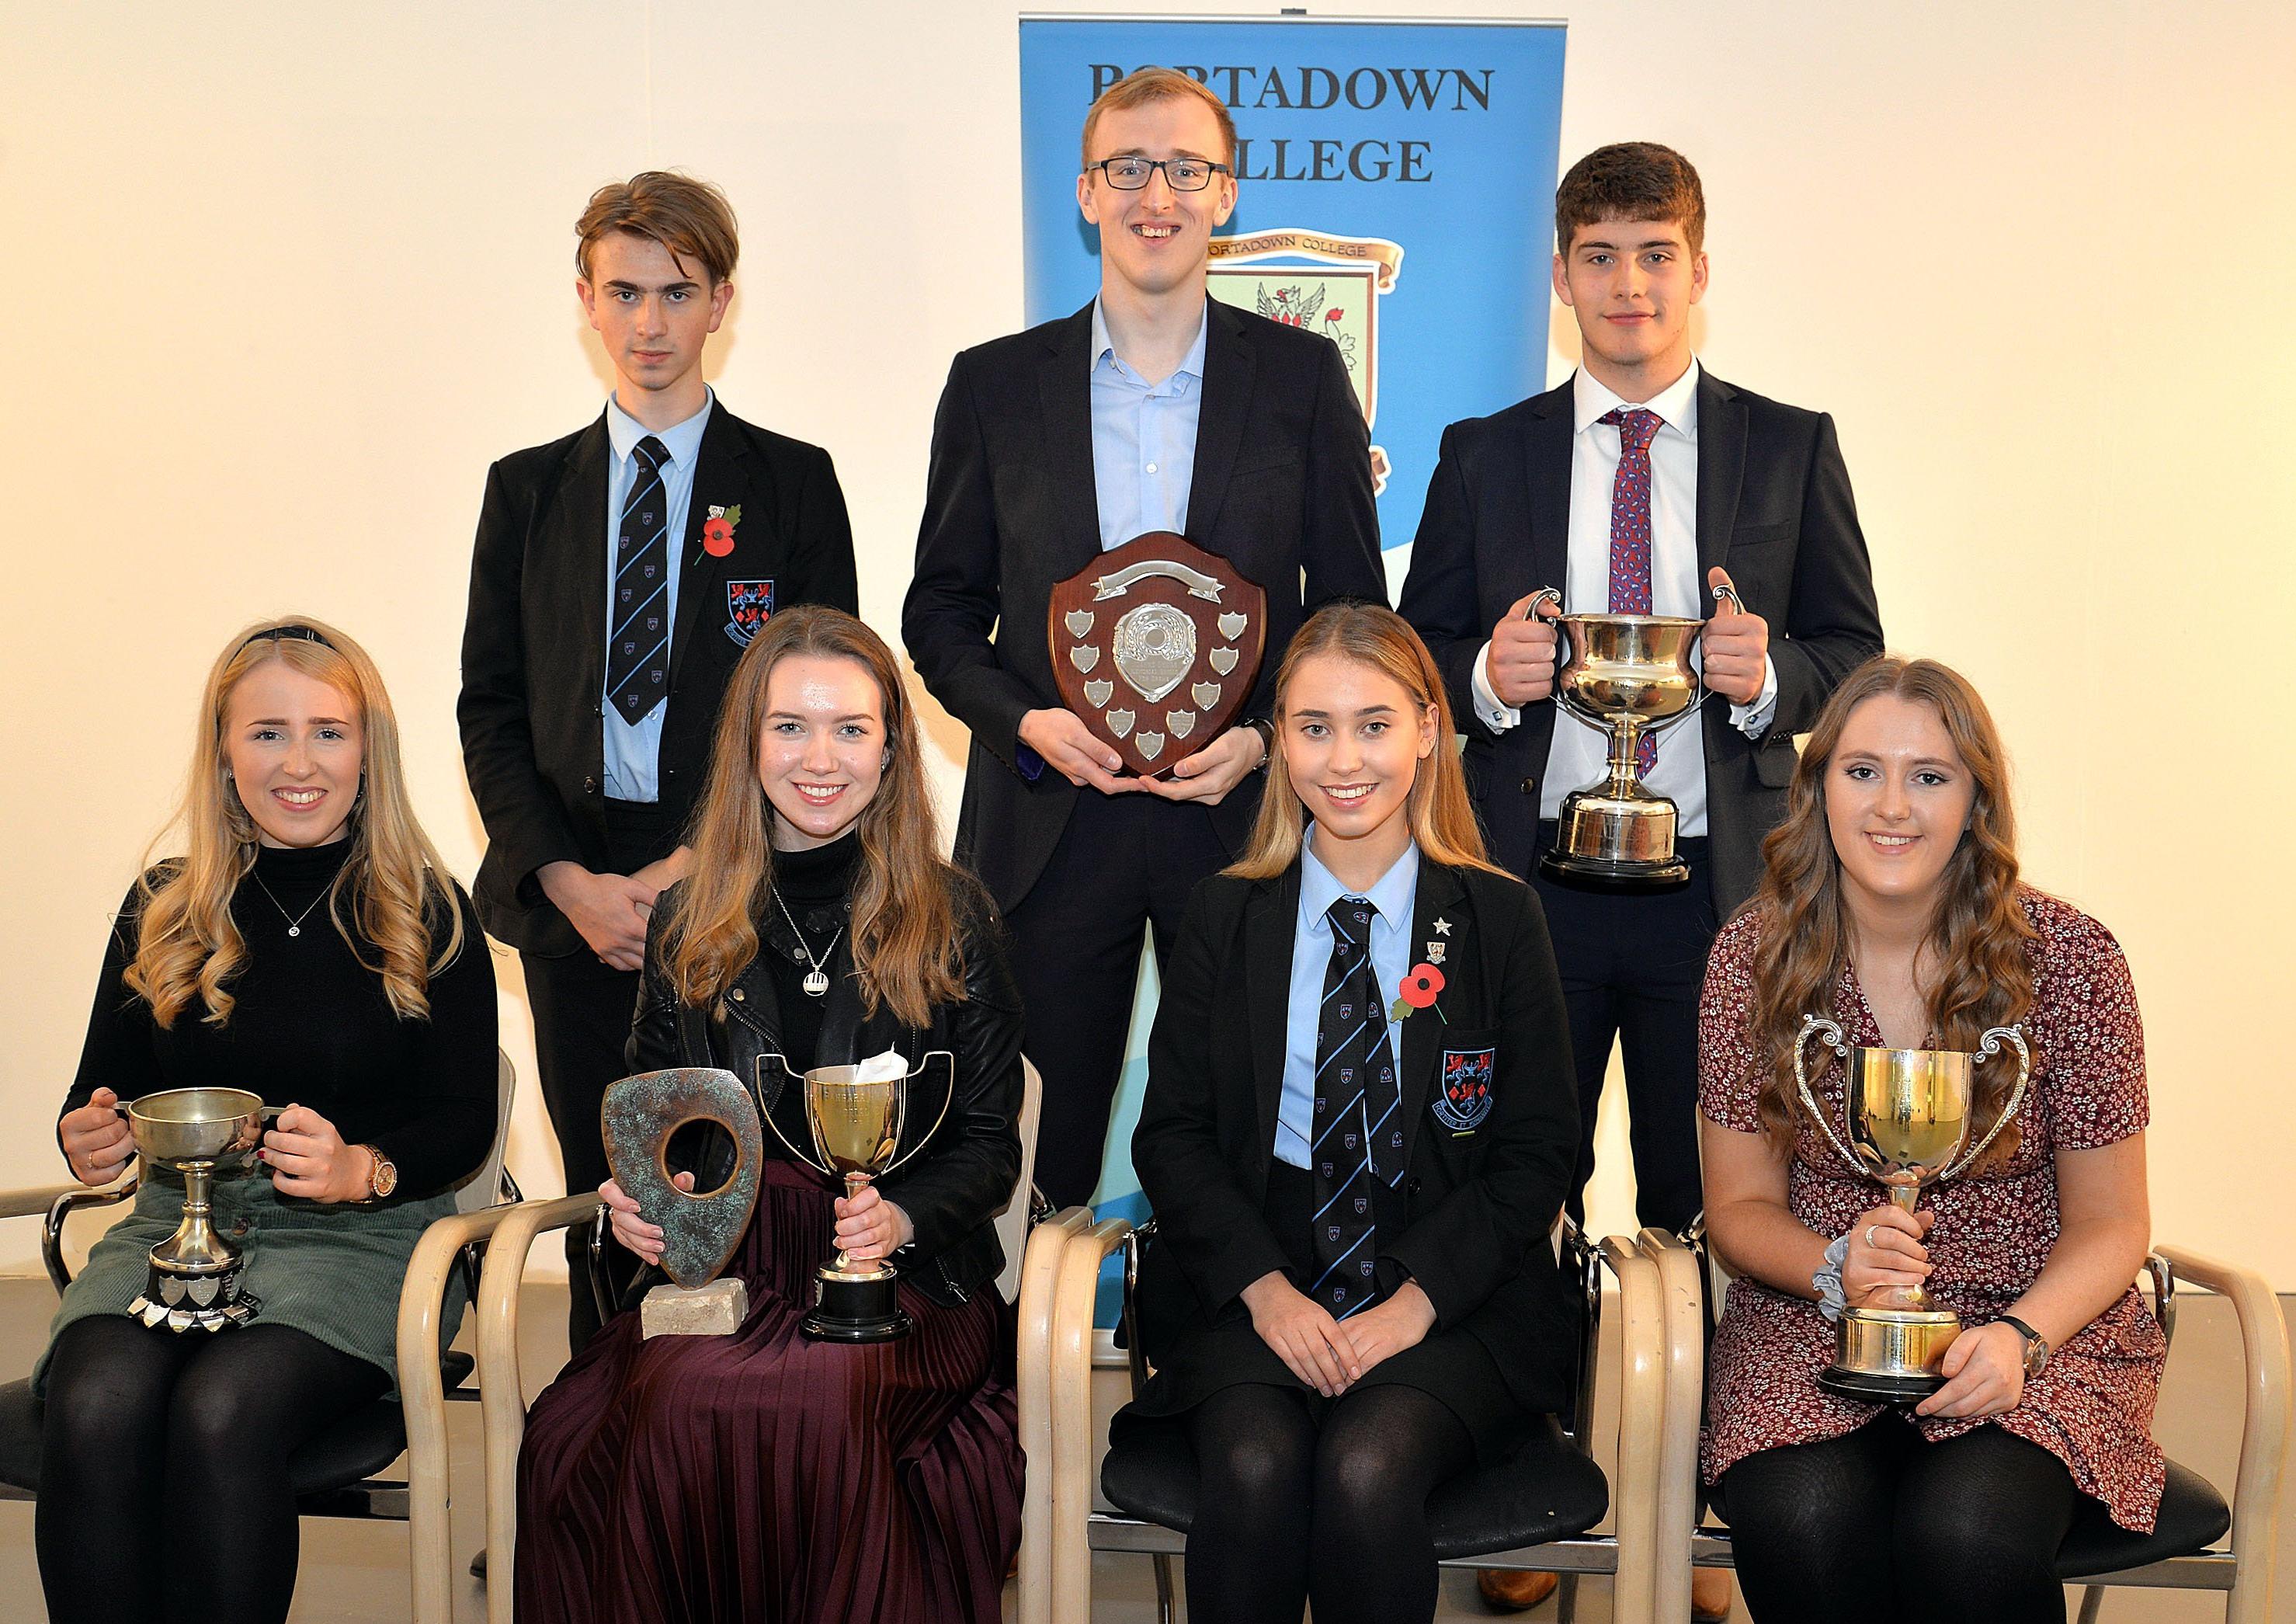 Arts and Community Award winners at Portadown College Speech Day including back row from left, Viggo Stanczak, Debating, Matthew Walsh, Drama, and Daniel Moorcroft, Community Services. Front from left, Amy Proctor, Music, Sara-Jo Loney, Music, Lily McClatchey, Drama, and Sophie McMahon, Community Services. INPT44-222.